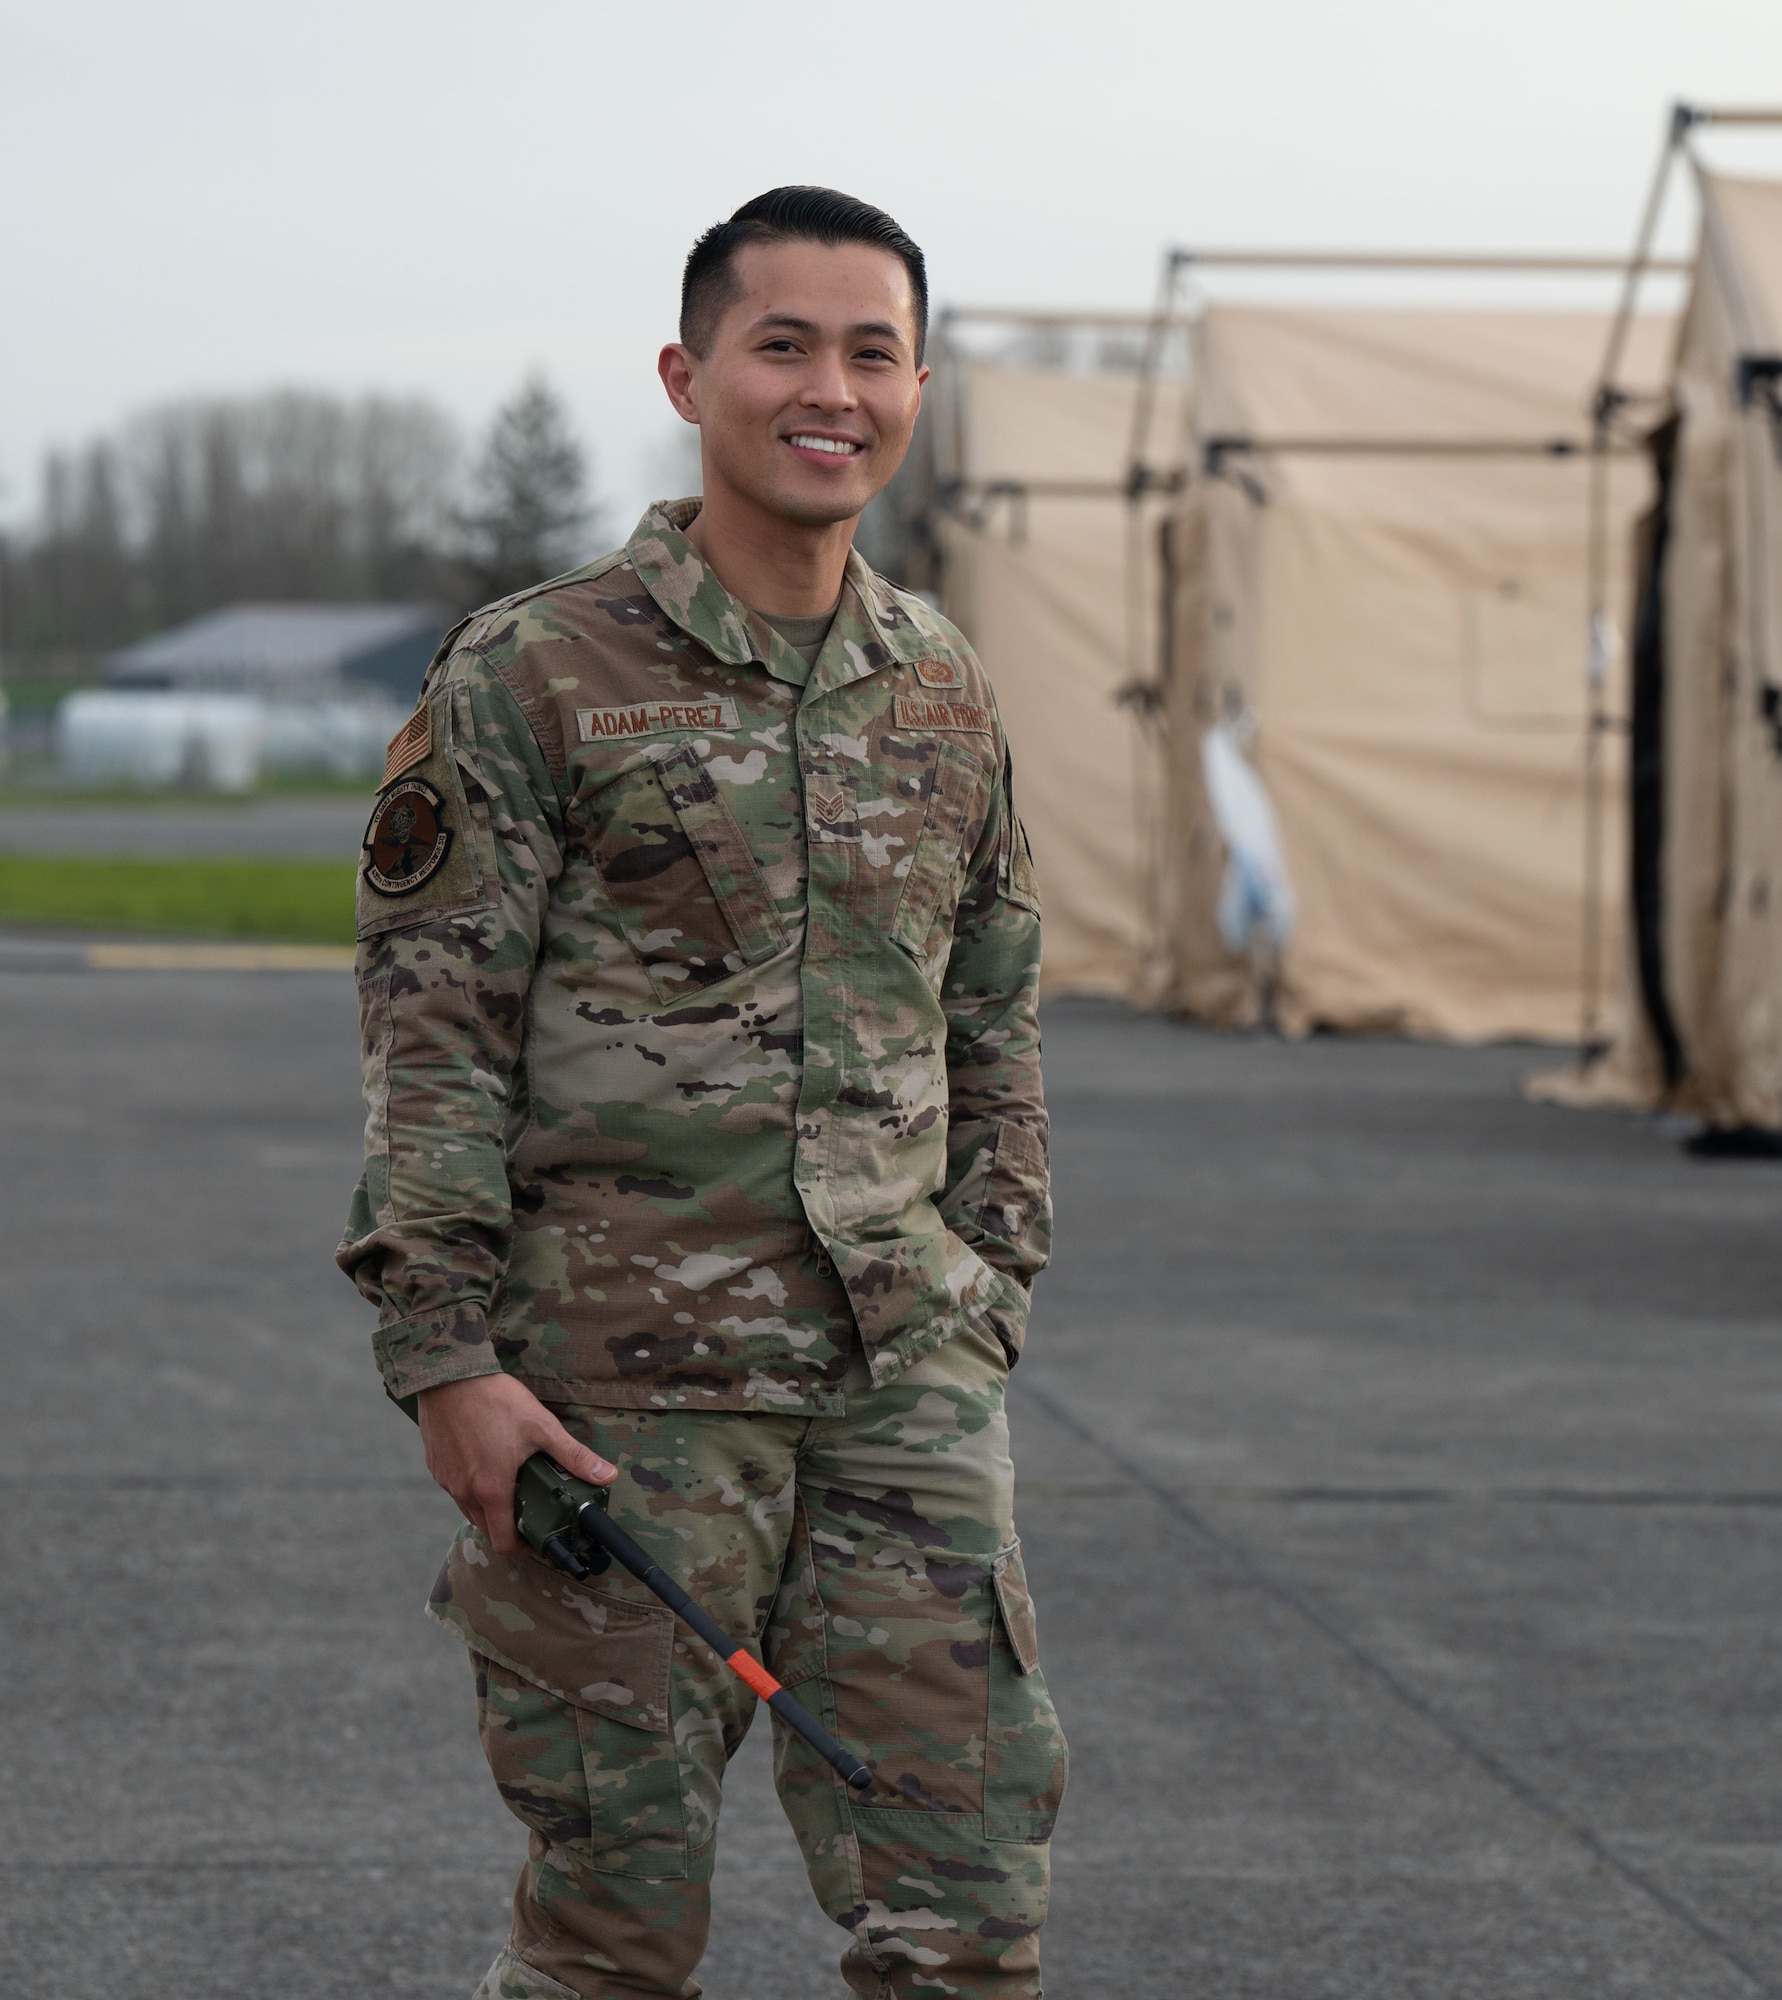 U.S. Air Force Staff Sgt. Jaicel Adam-Perez is one of two personnel in support of contingency operations (PERSCO) members for over 120 members who are participating in Exercise Agile Bison at Chièvres Air Base, Belgium, March 13, 2023.